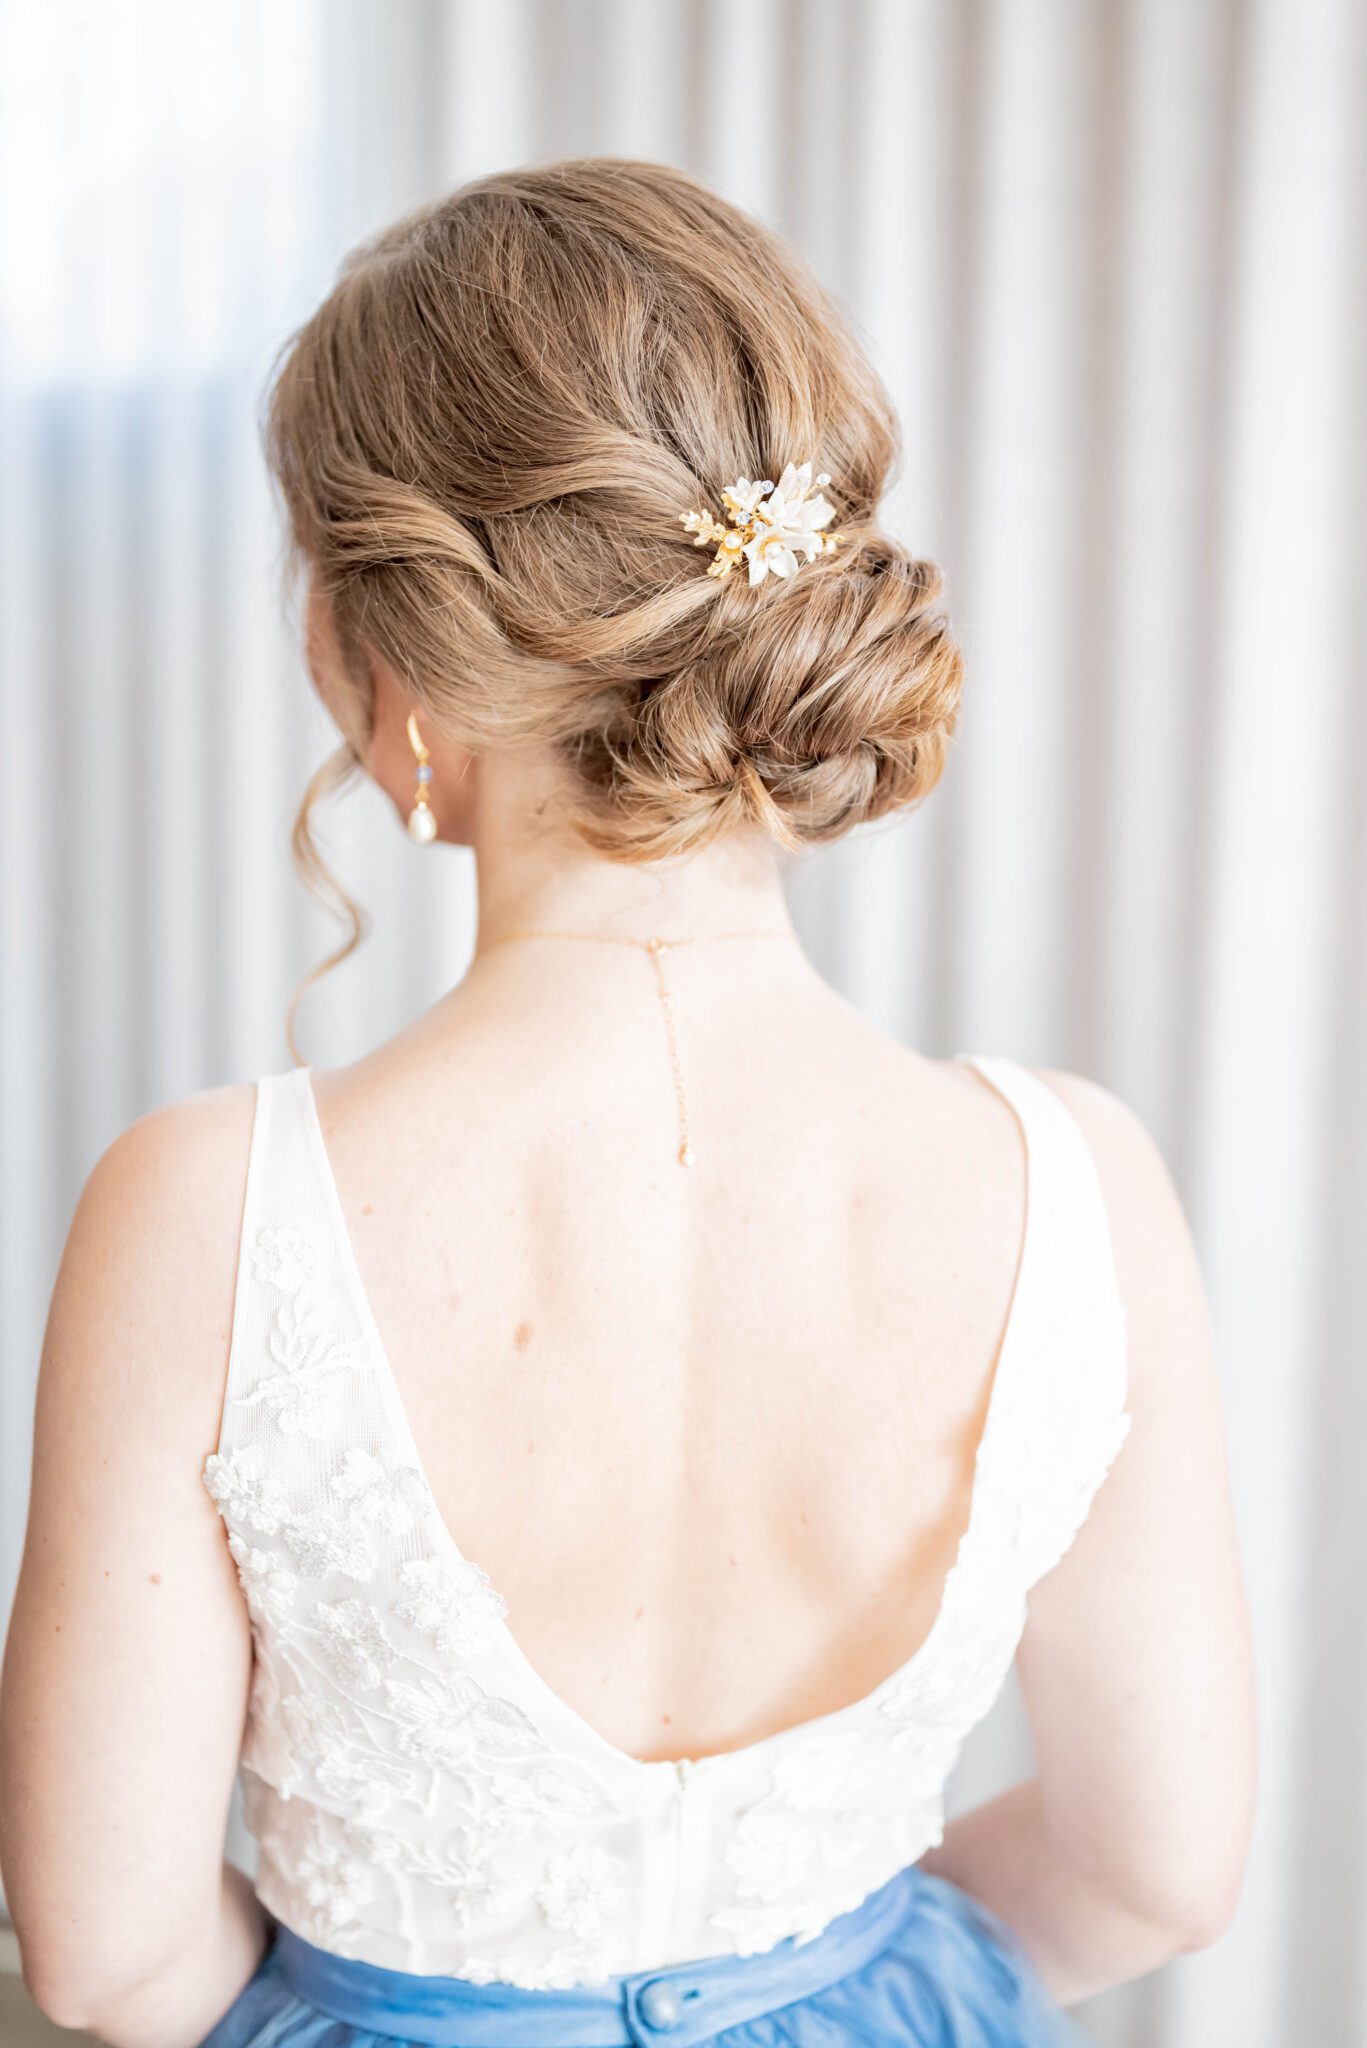 Romantic and timeless bridal up-do hairstyle with white, blue and gold floral hair pin, bridal portrait of the bride's back showcasing the low-back white lace top of her wedding dress